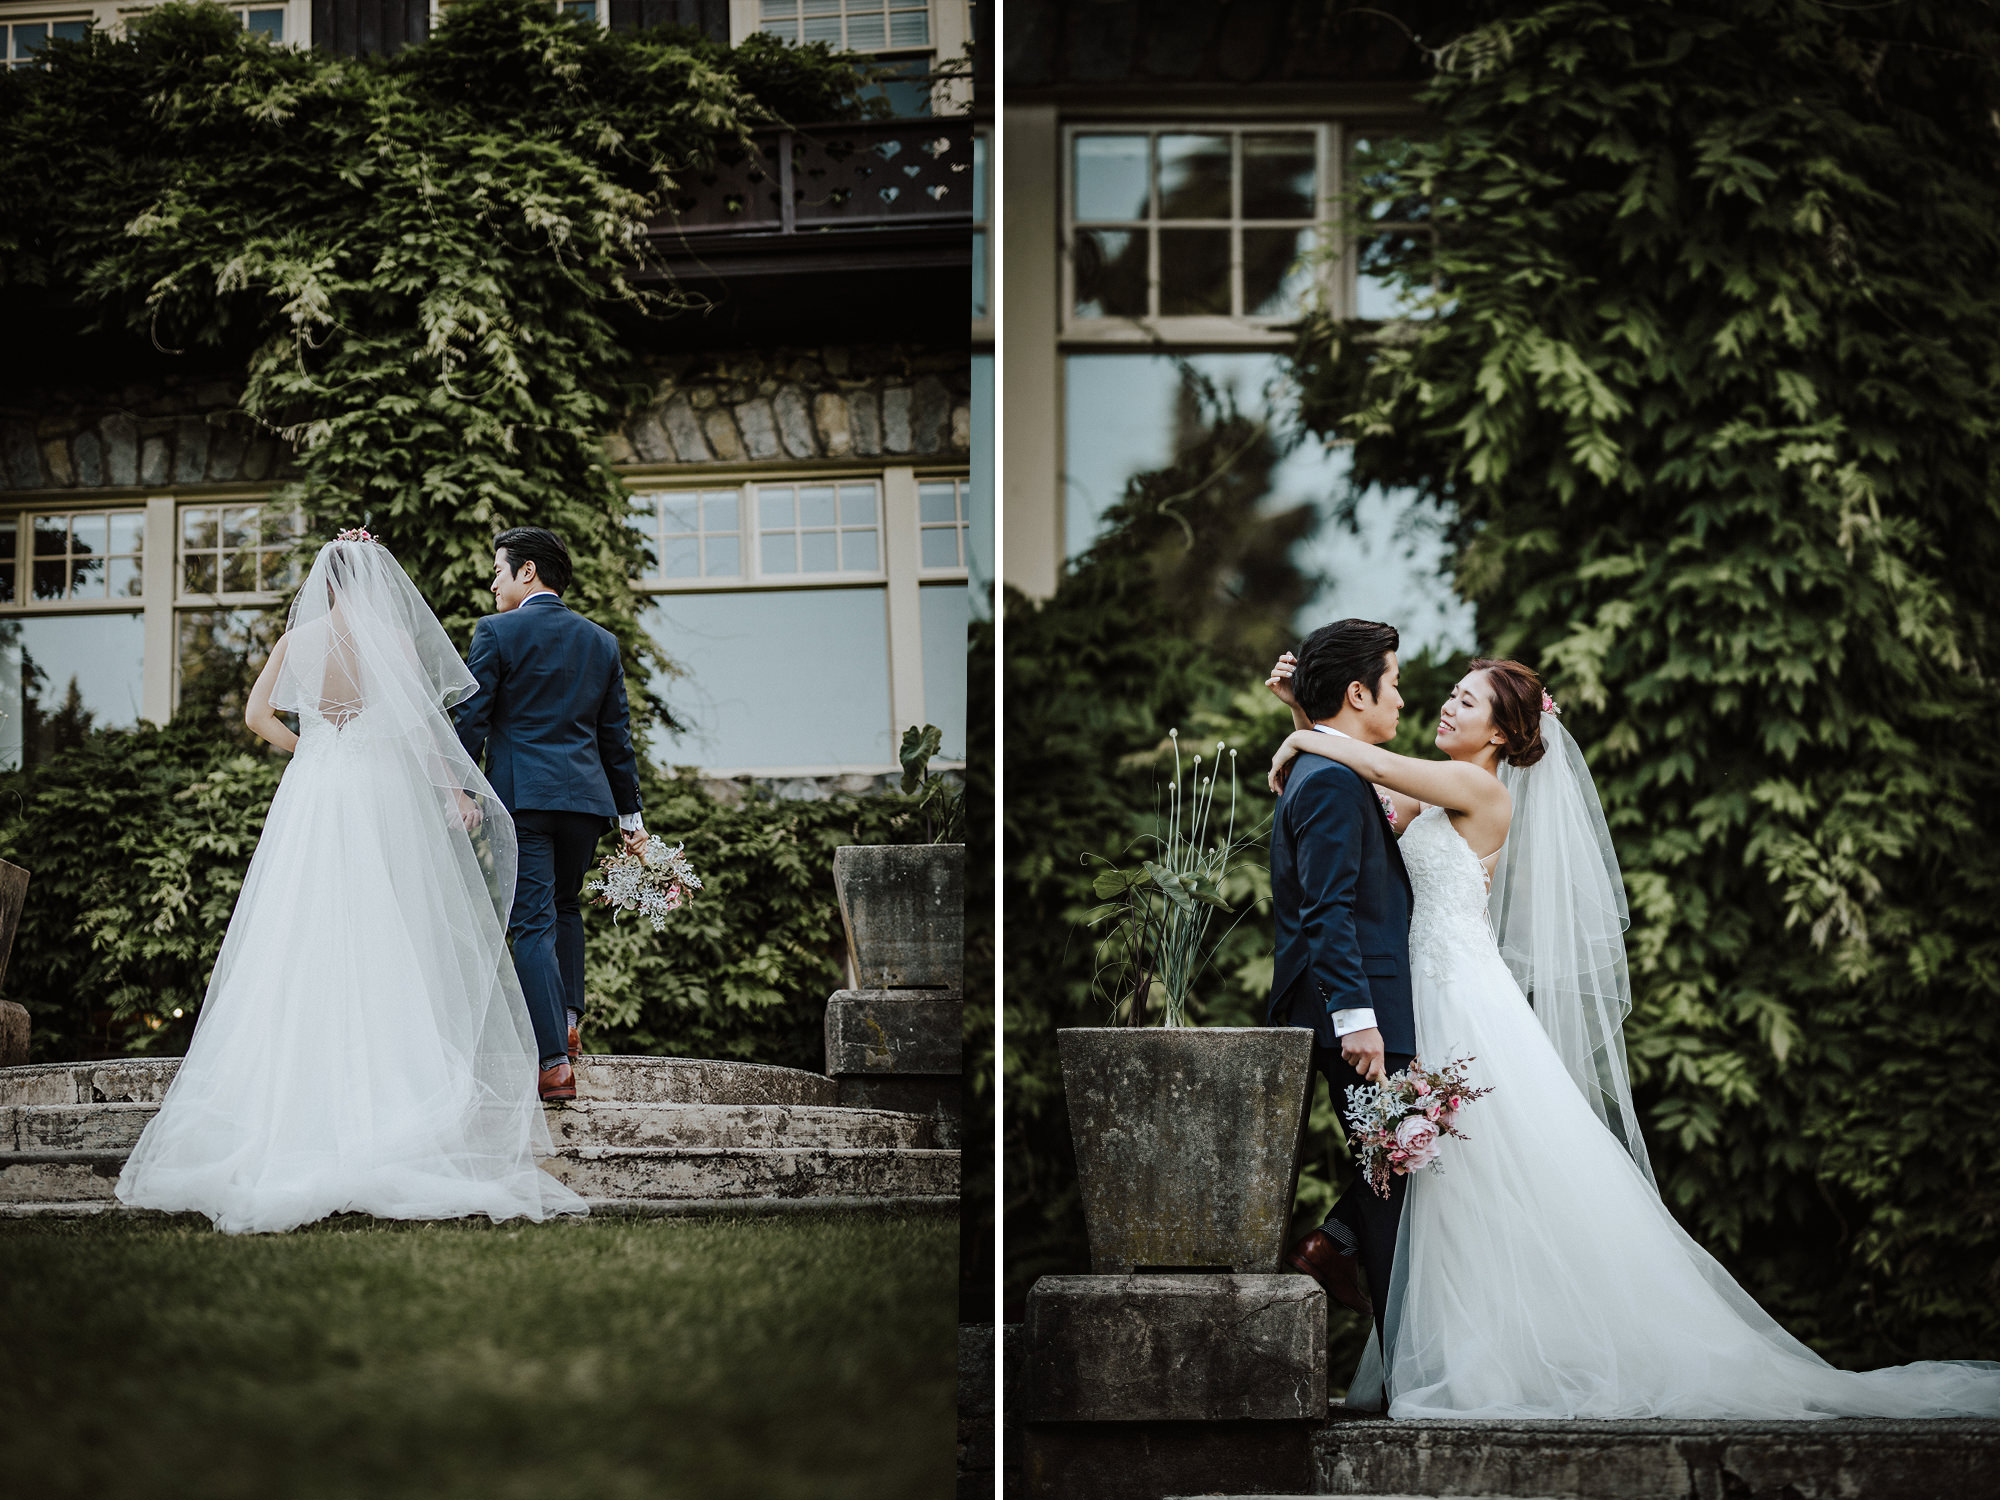 Wedding couple walk up stone steps to rock wall with ivy draping down